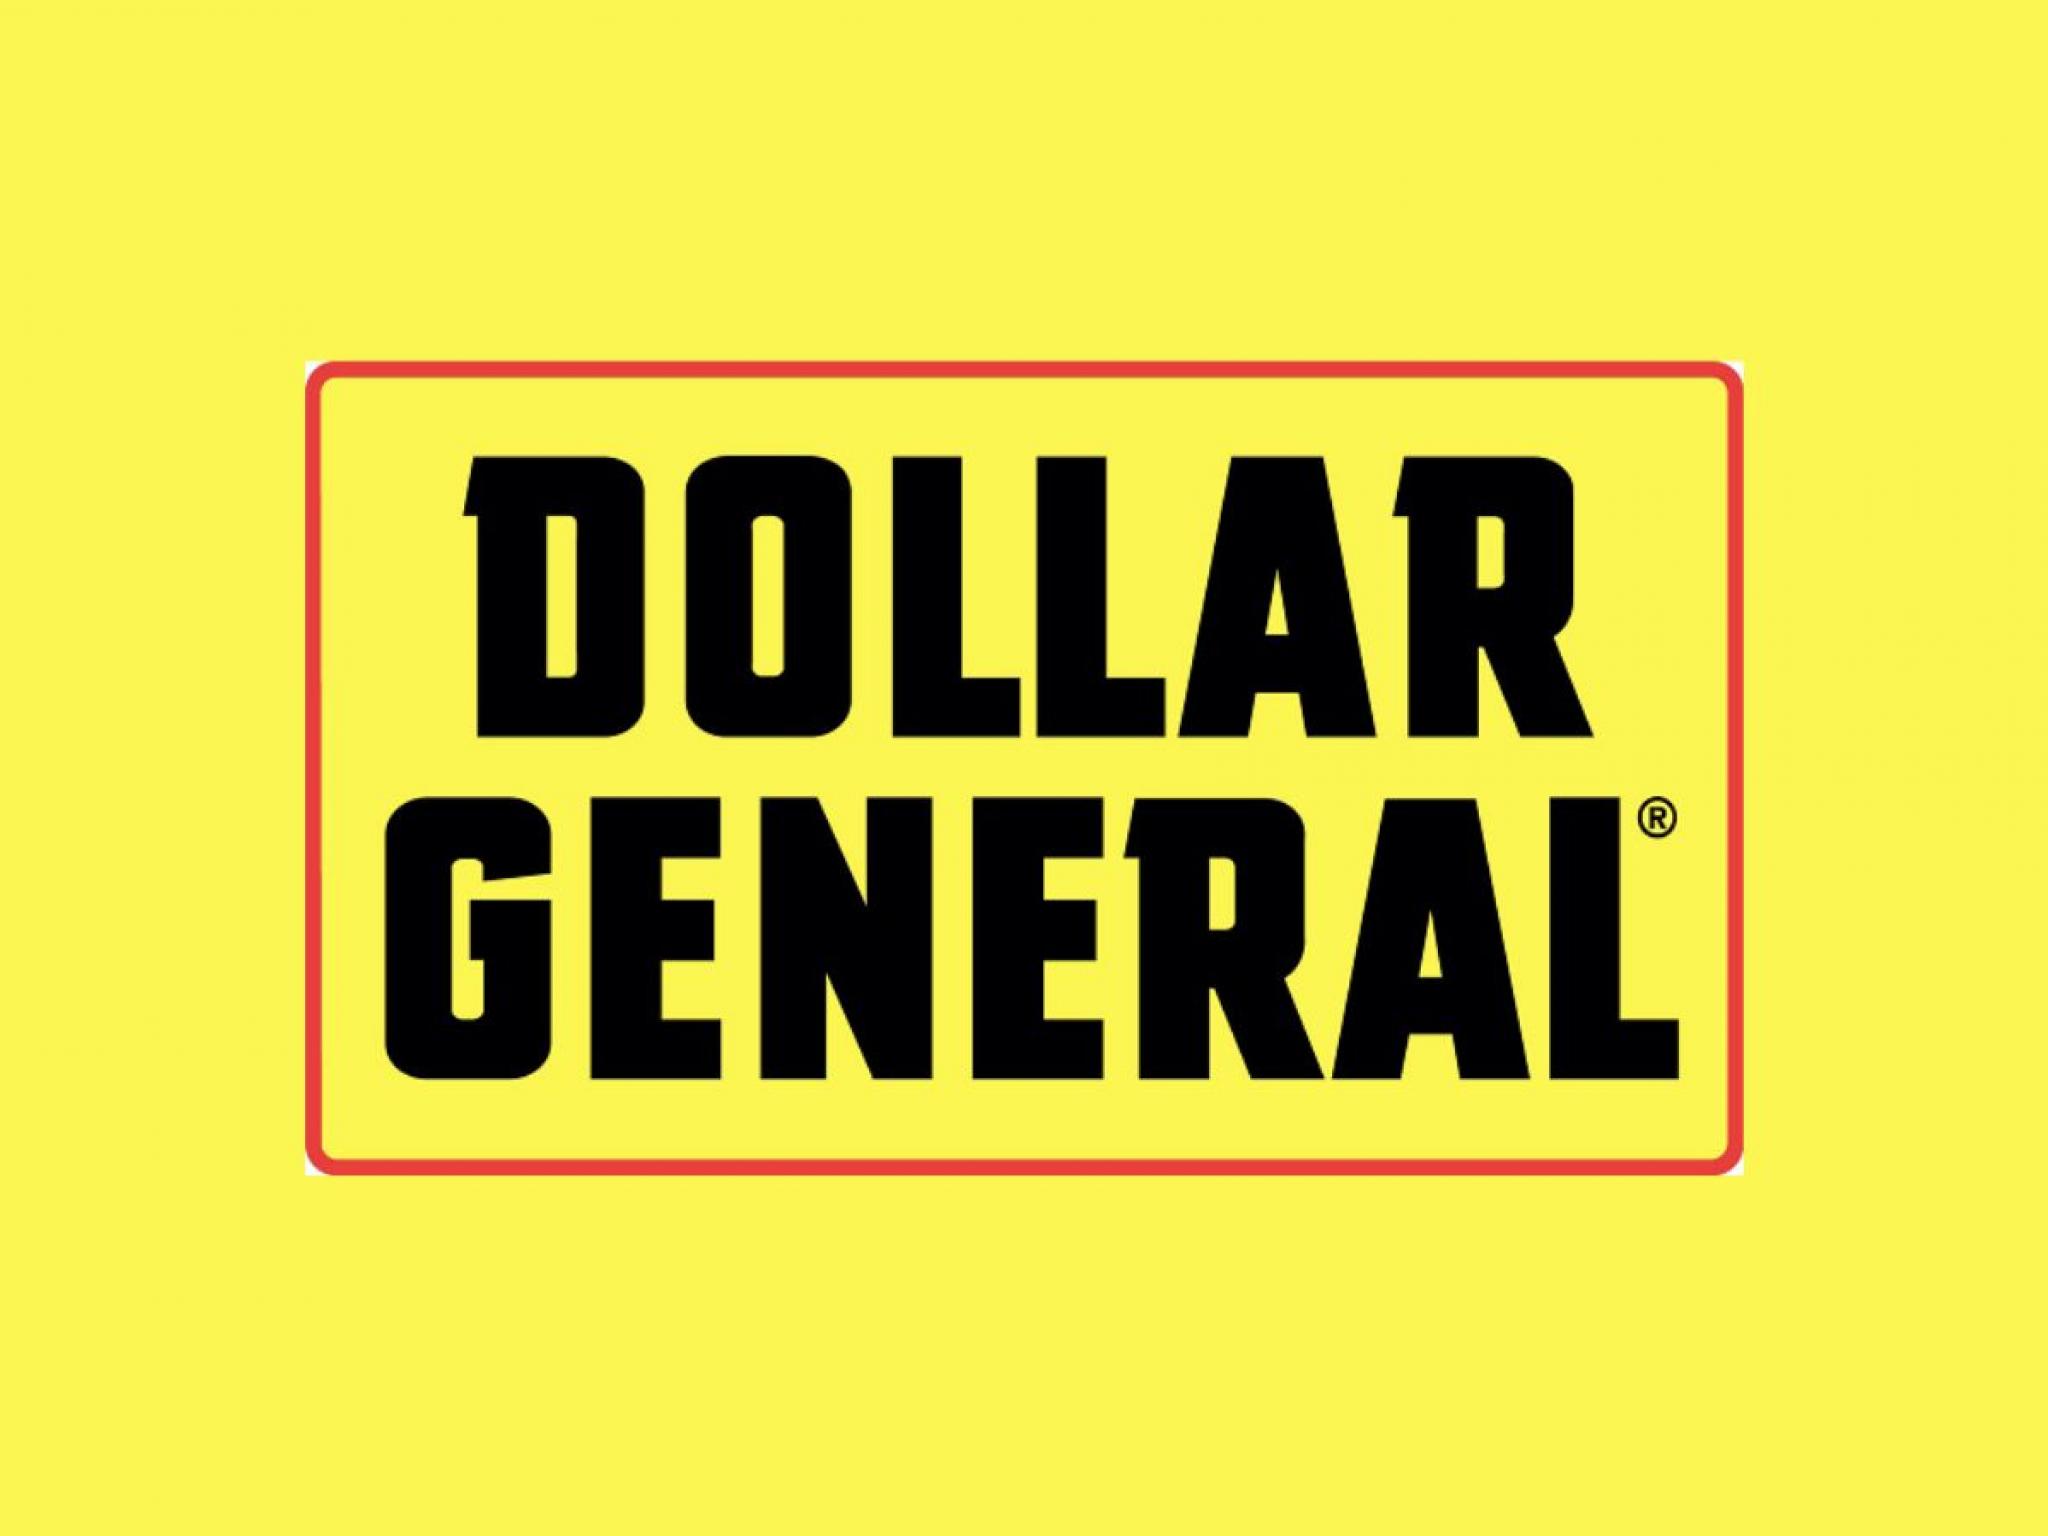  nasdaq-surges-over-1-dollar-general-lowers-annual-guidance 